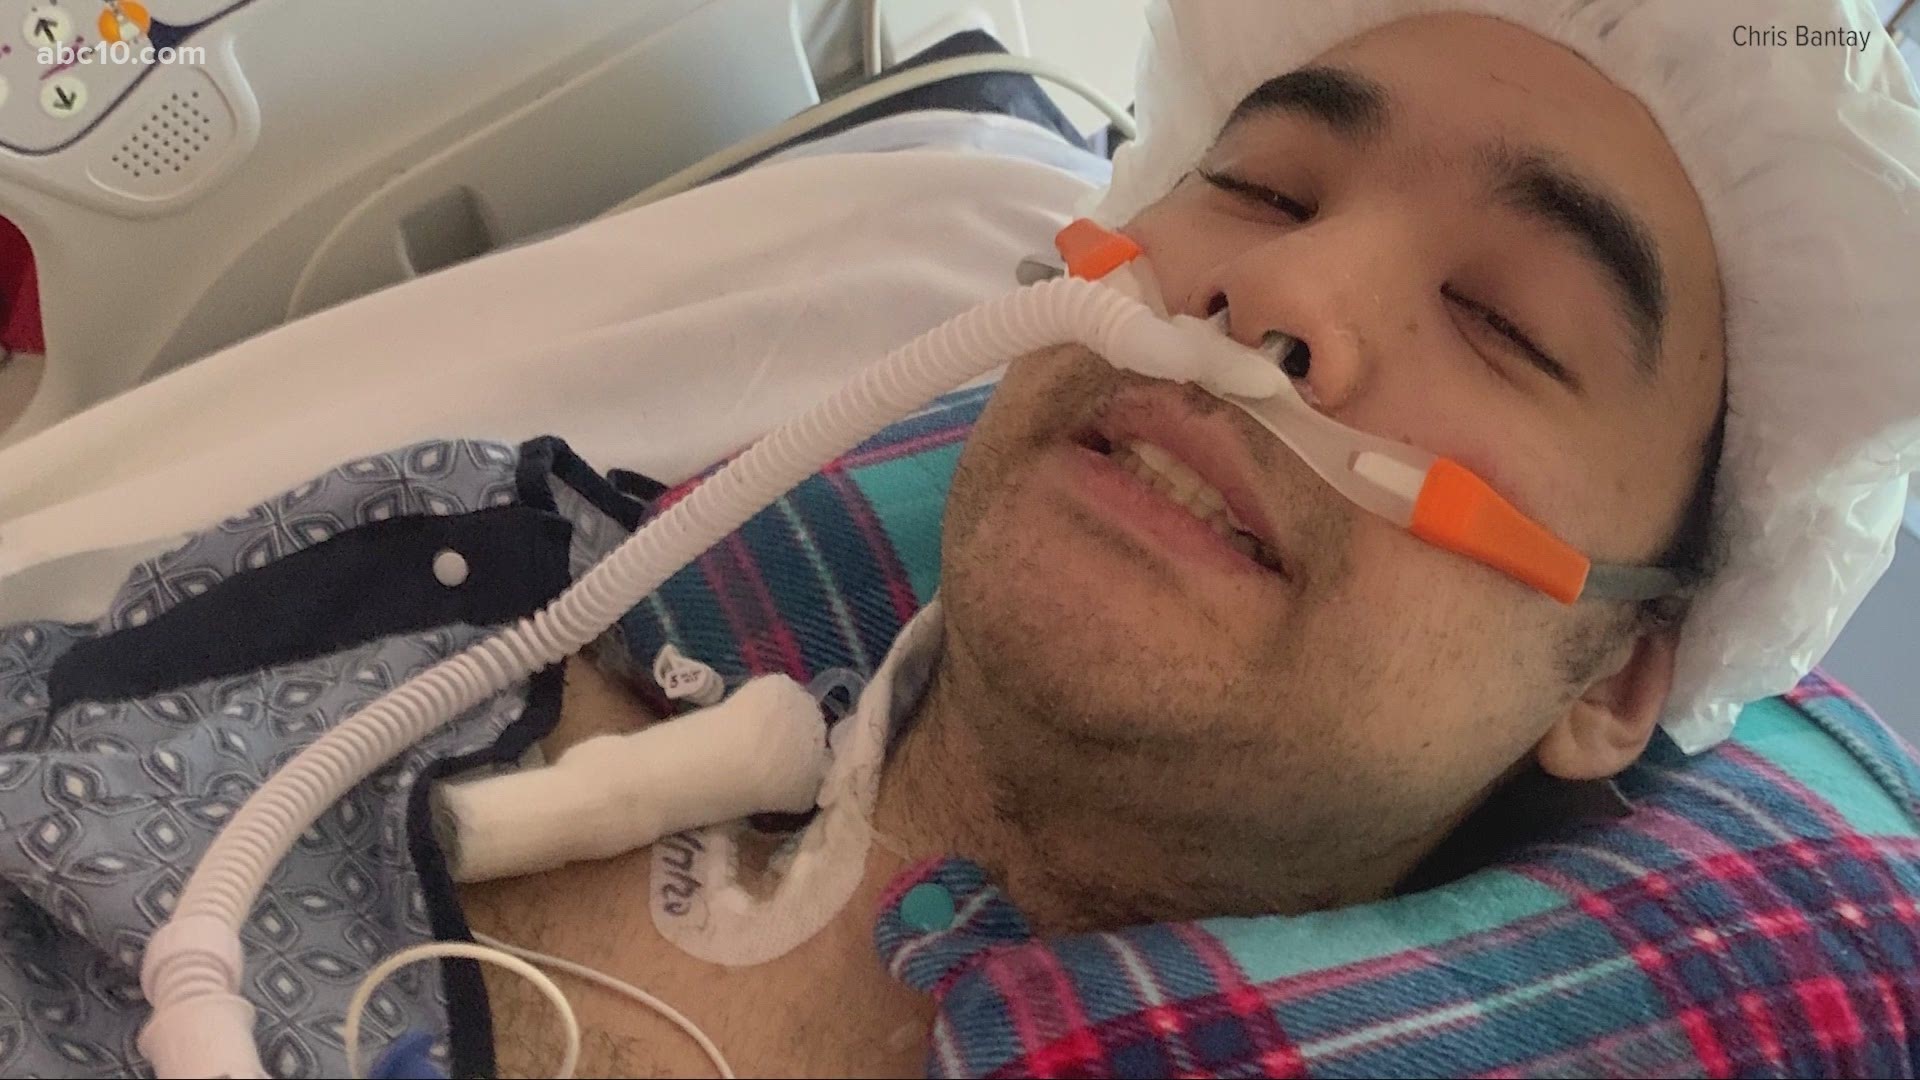 The Sacramento Pieology employee is paralyzed from the neck down, but staying positive. His friends and family are raising money to help his recovery.